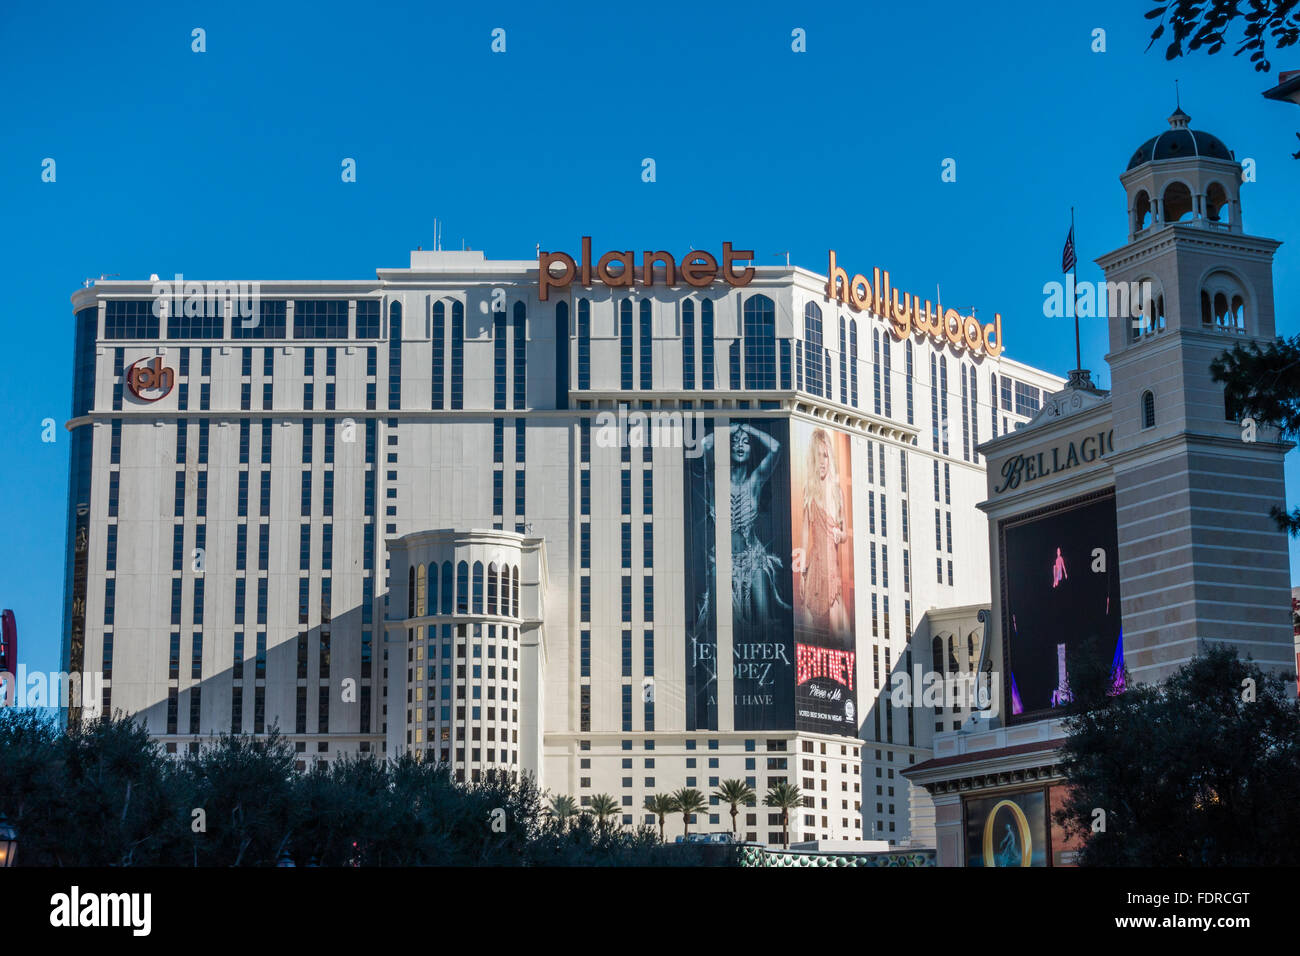 Planet hollywood hi-res stock photography and images - Alamy